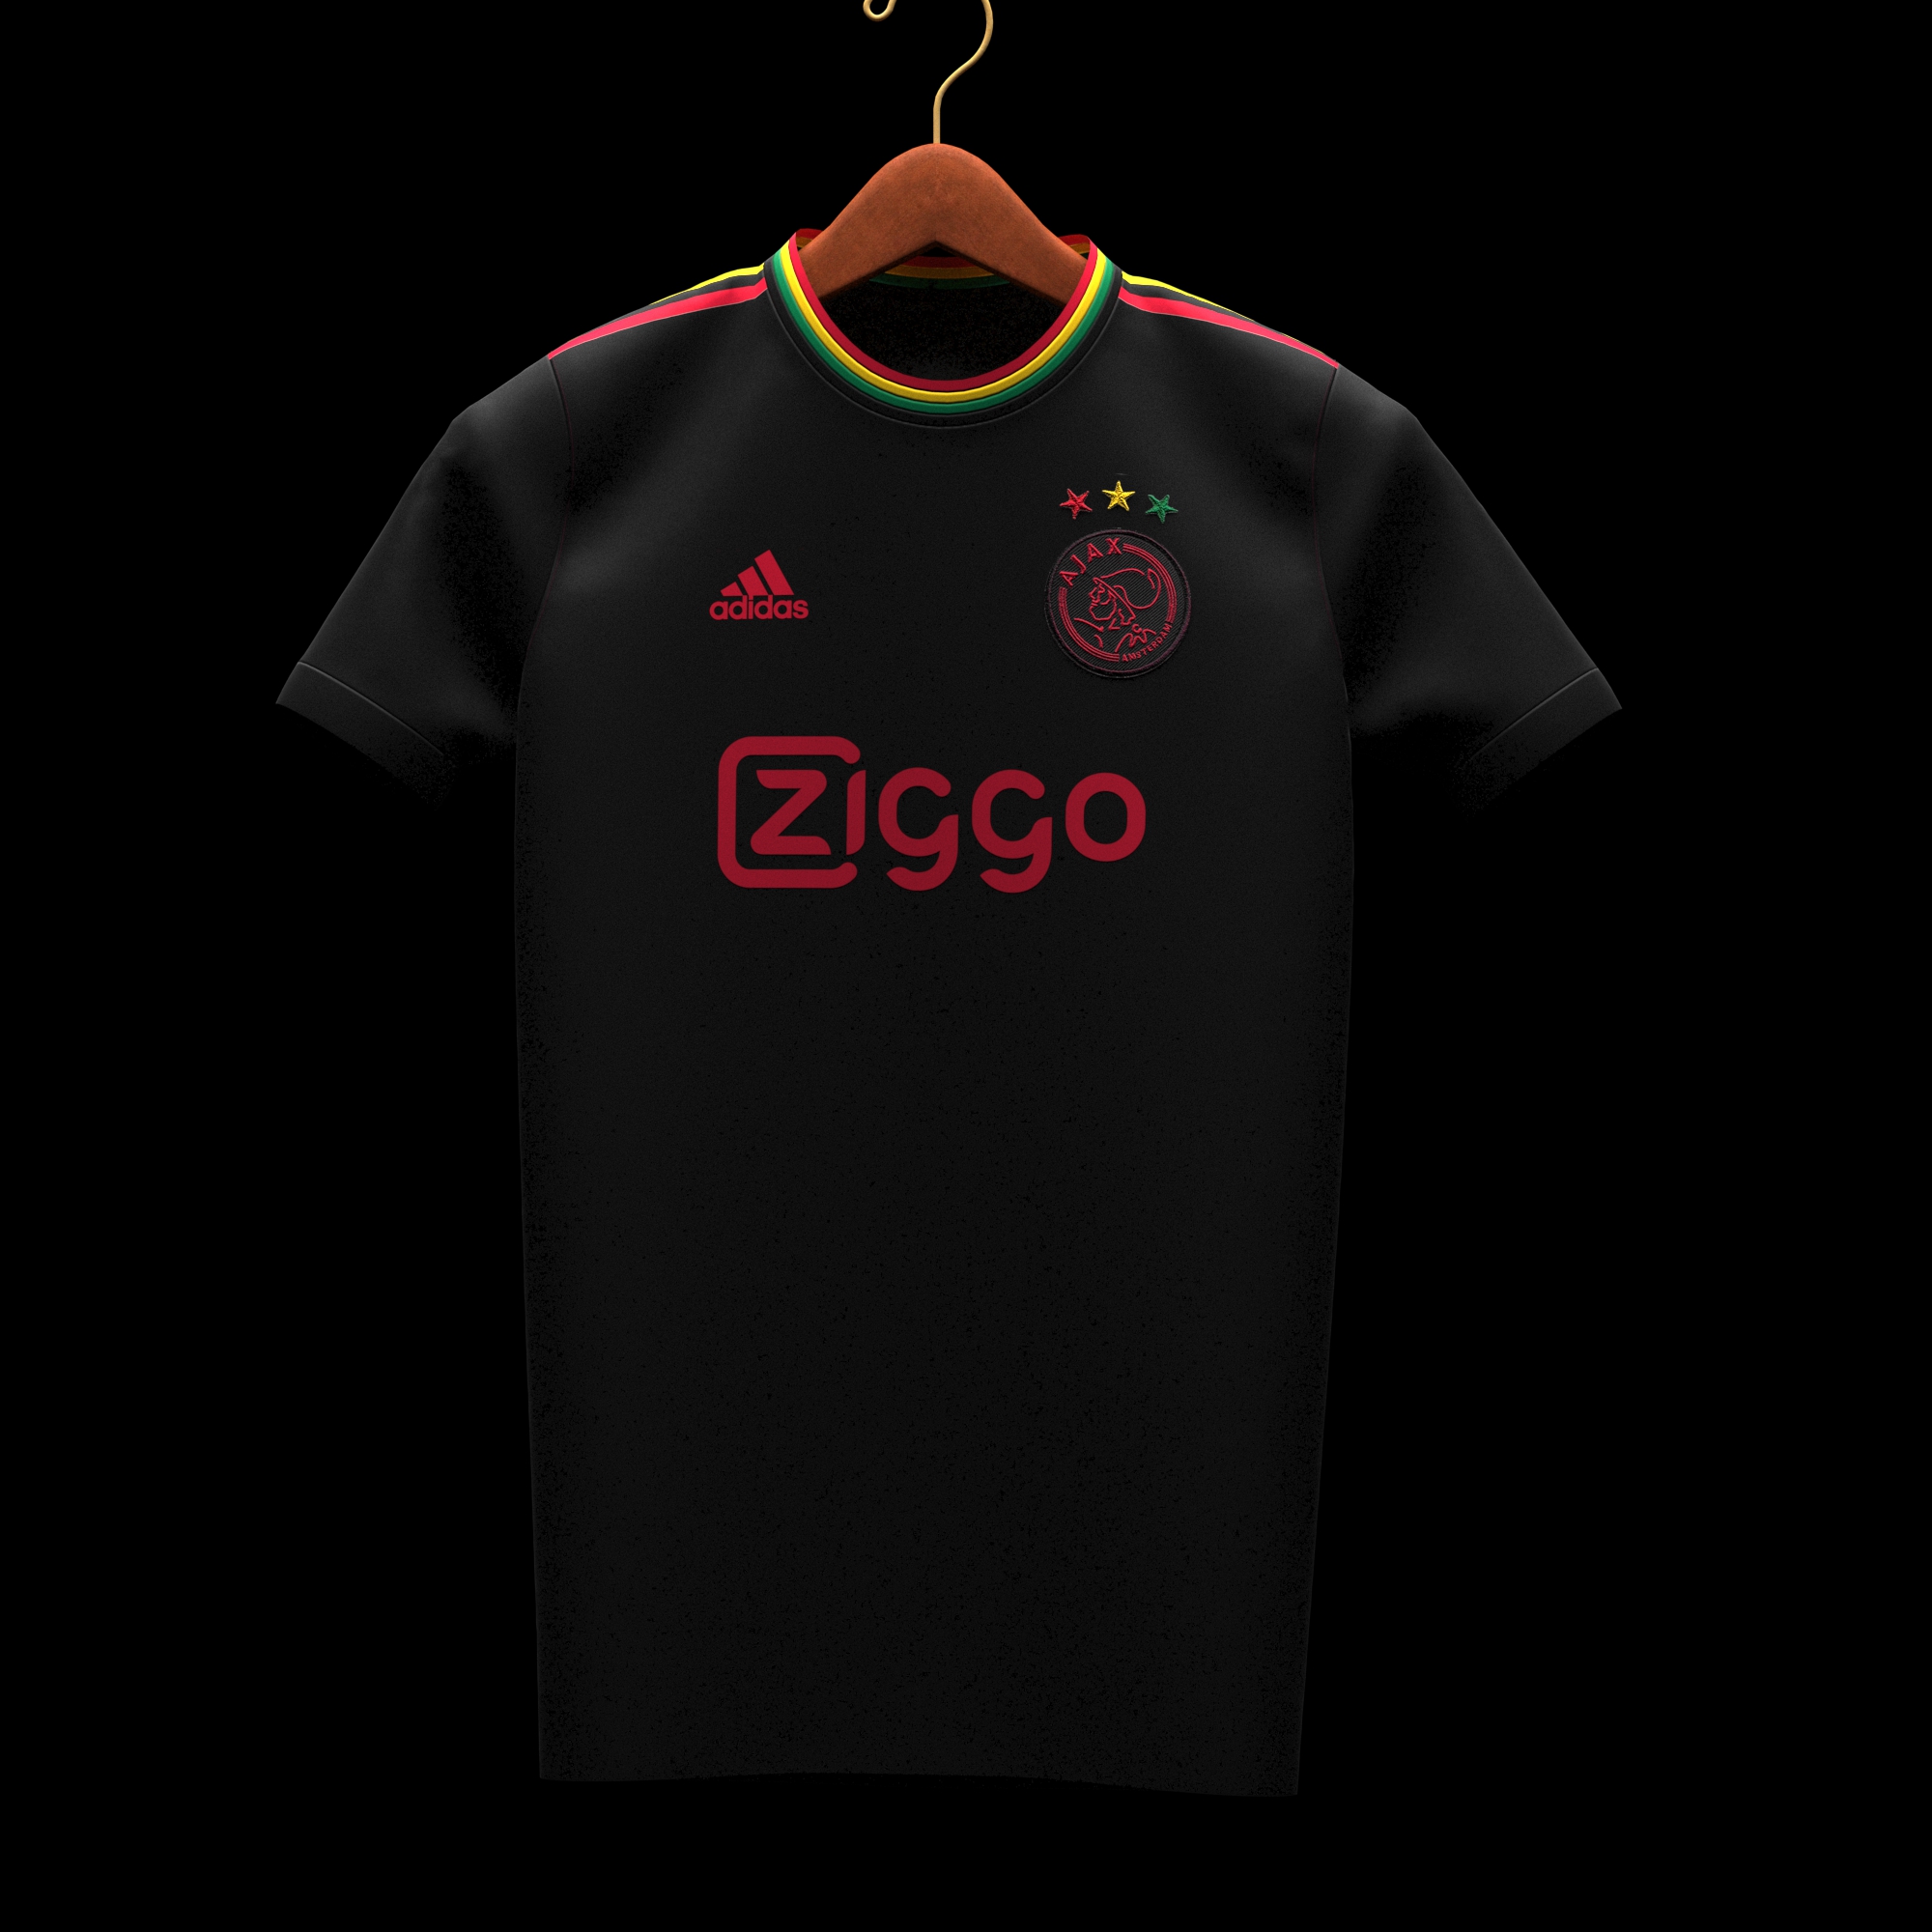 Jack Henderson on Twitter: "Ajax 21/22 Third Shirt - Prediction About 70%  accurate. Yes, it's going to be a tribute to Bob Marley.  https://t.co/xpOpzKeqZt" / Twitter